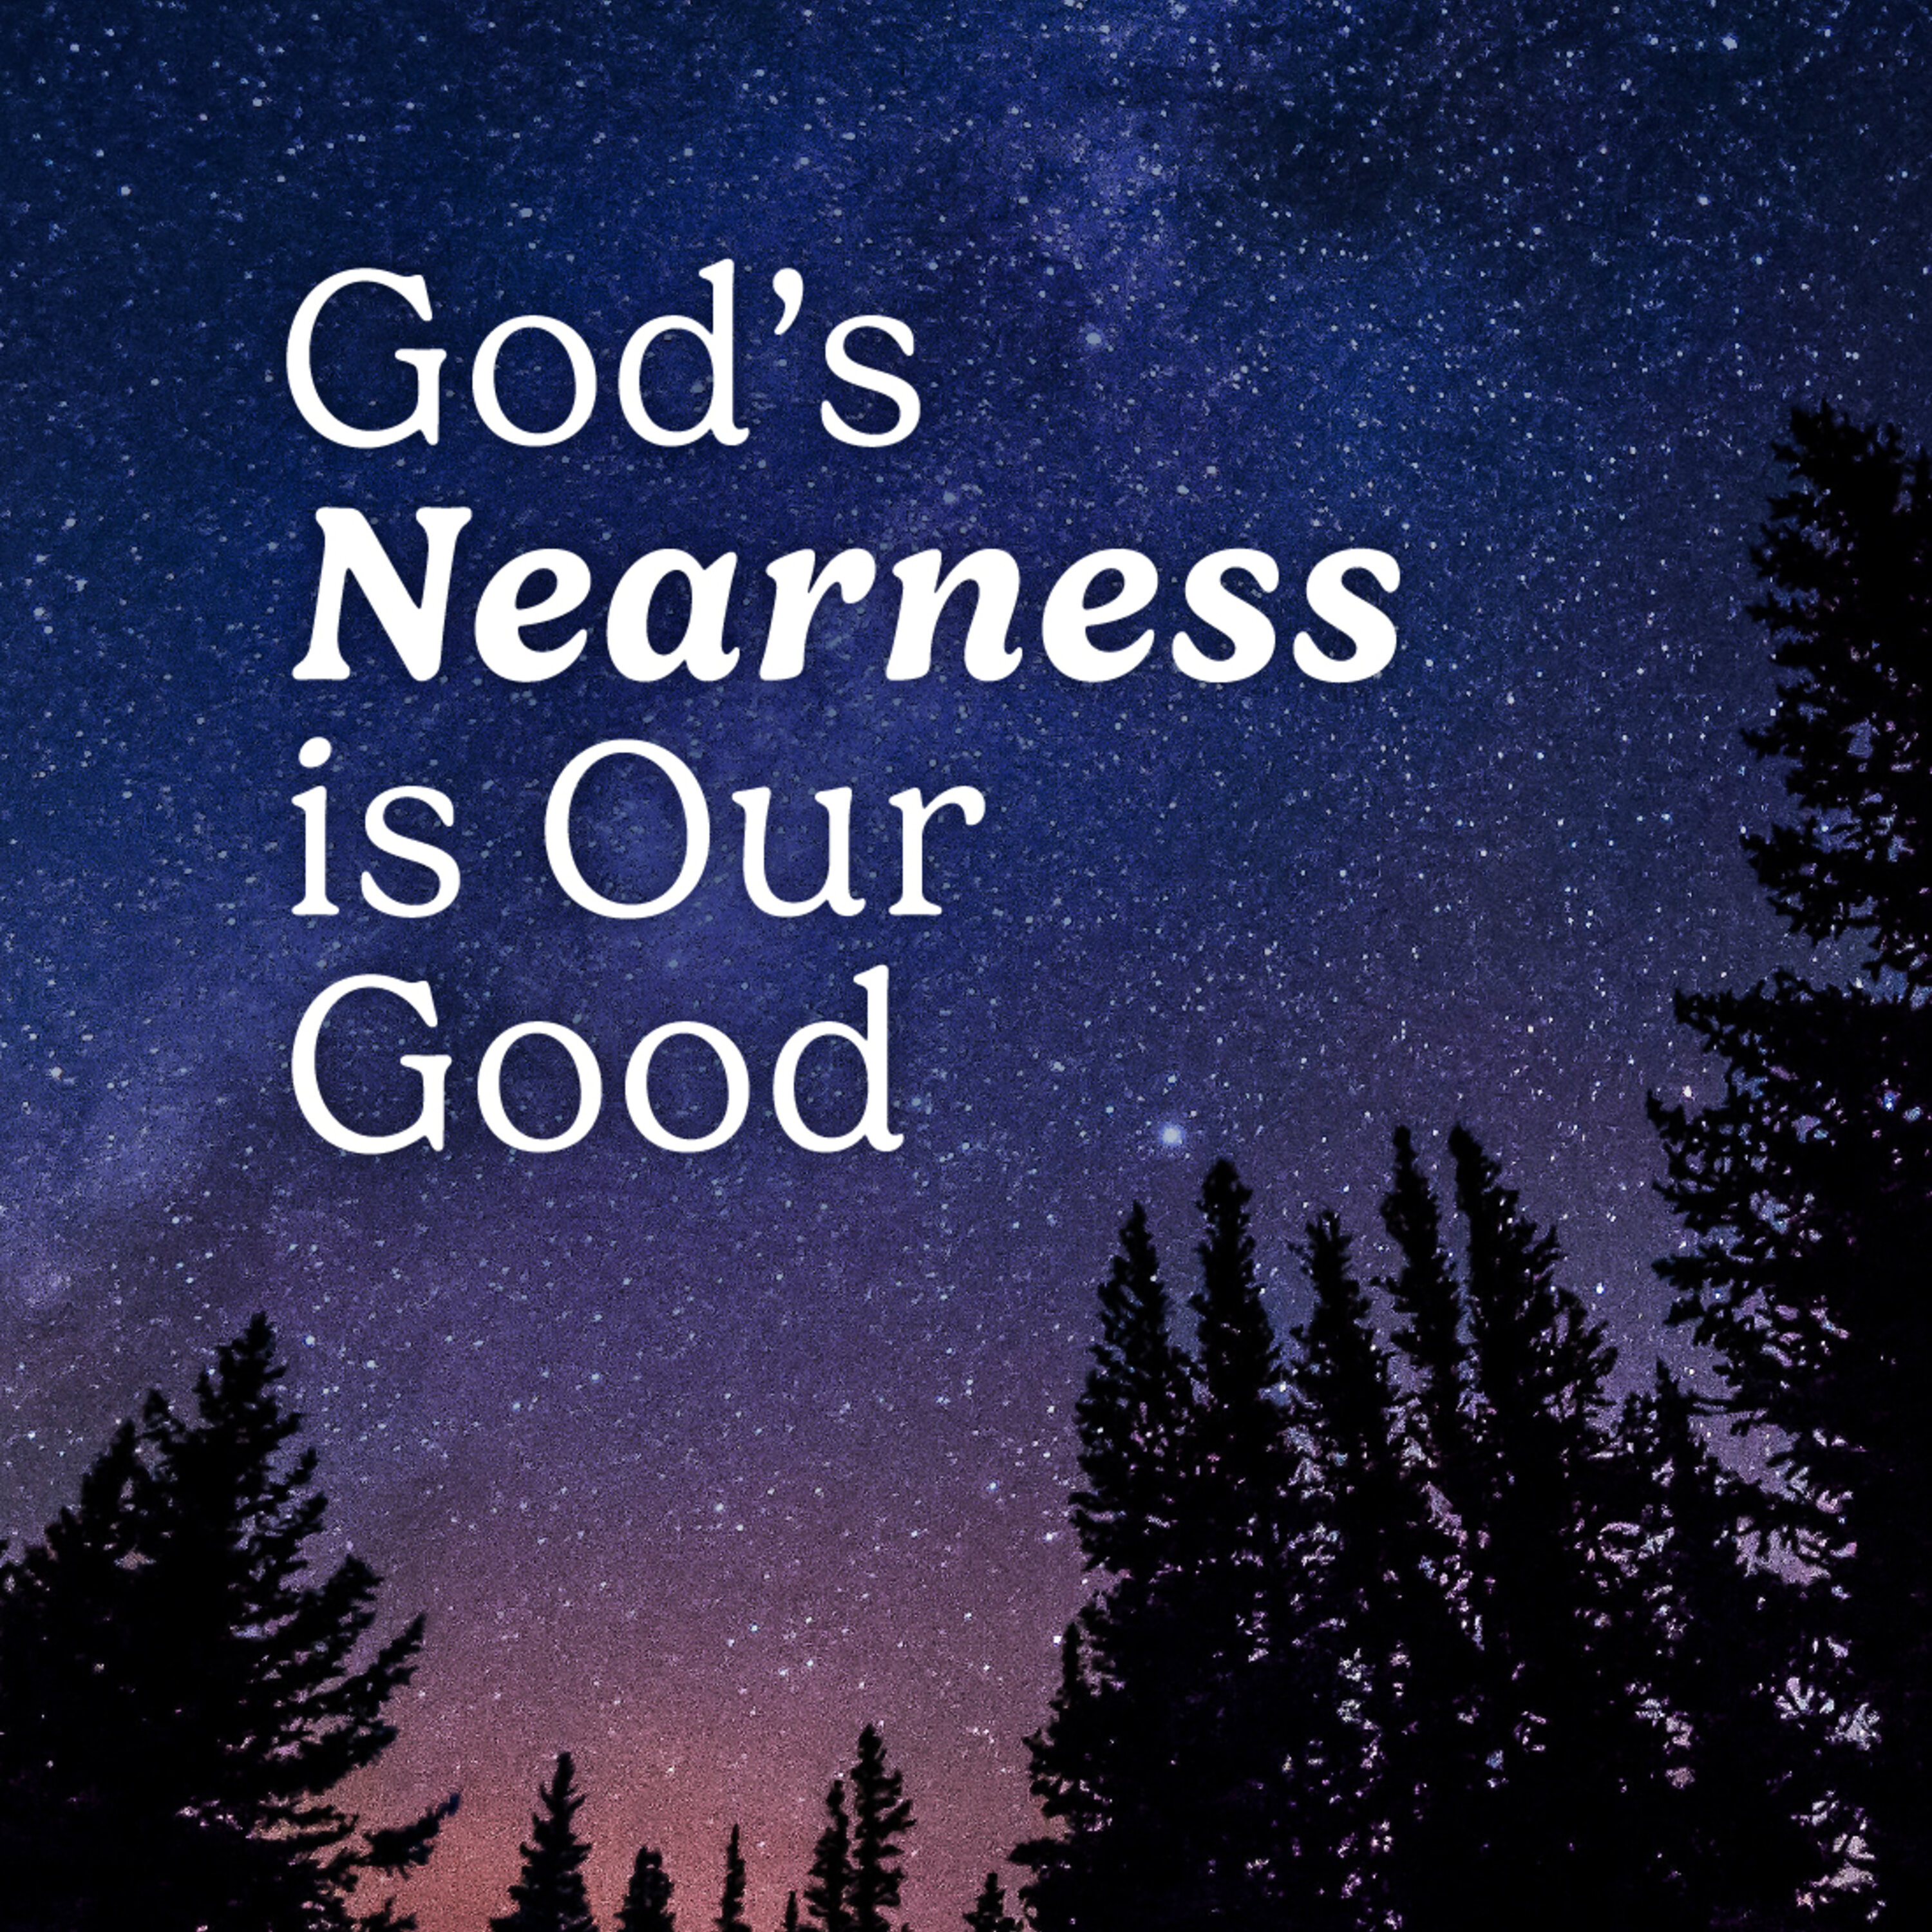 God's Nearness is Our Good